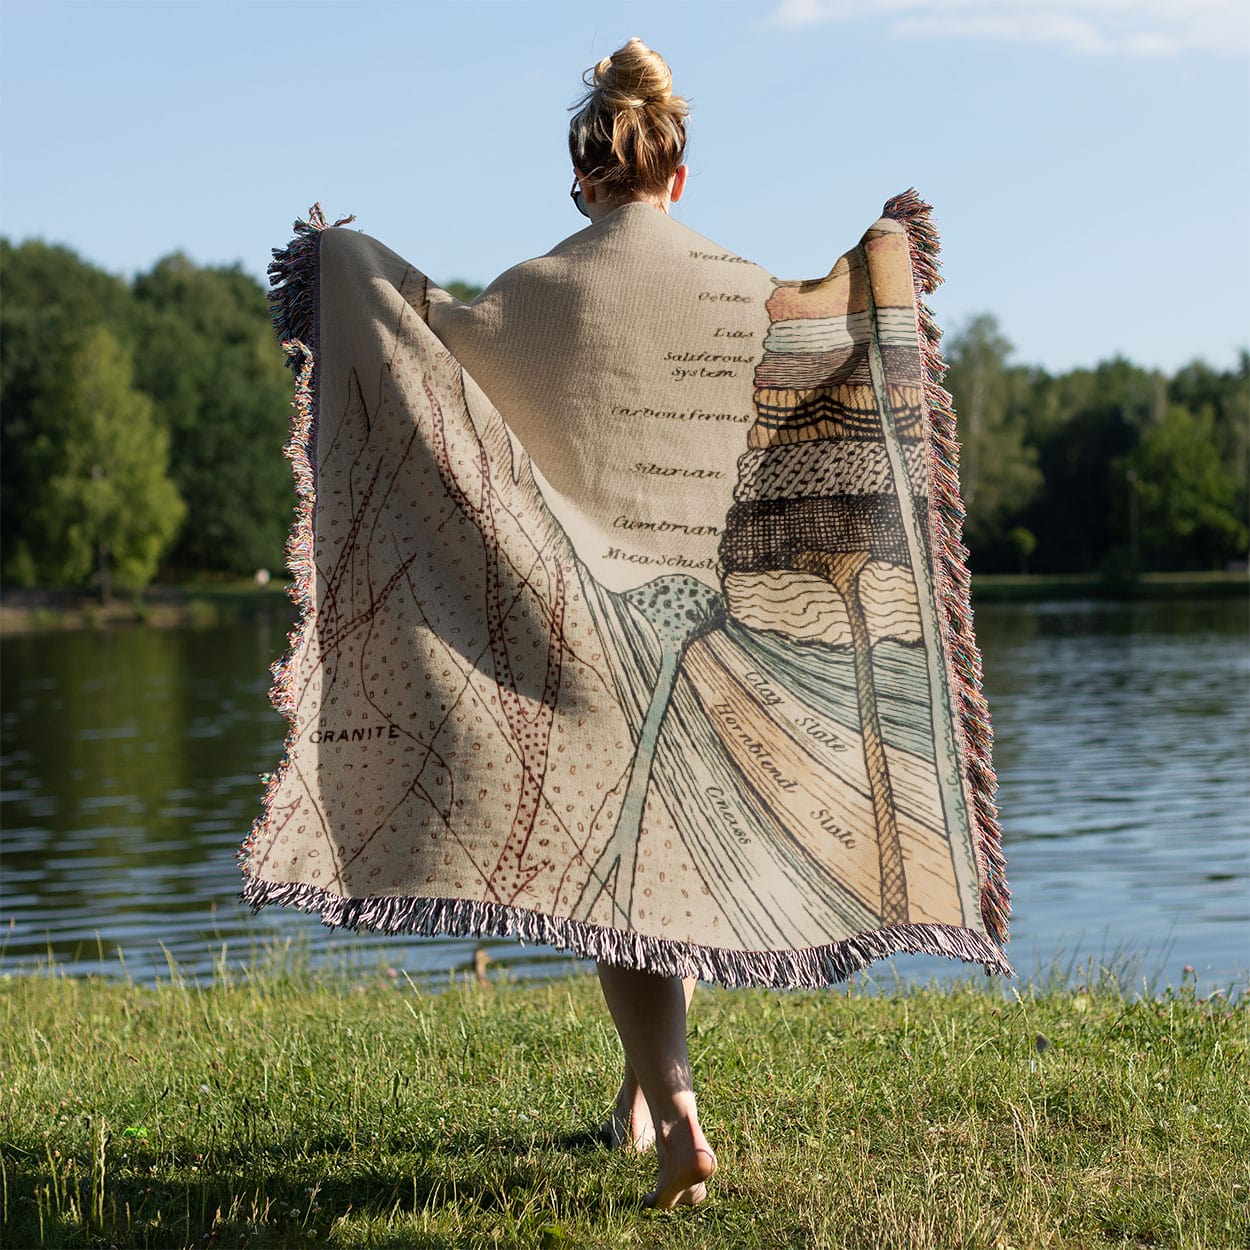 Cool Science Woven Blanket Held on a Woman's Back Outside